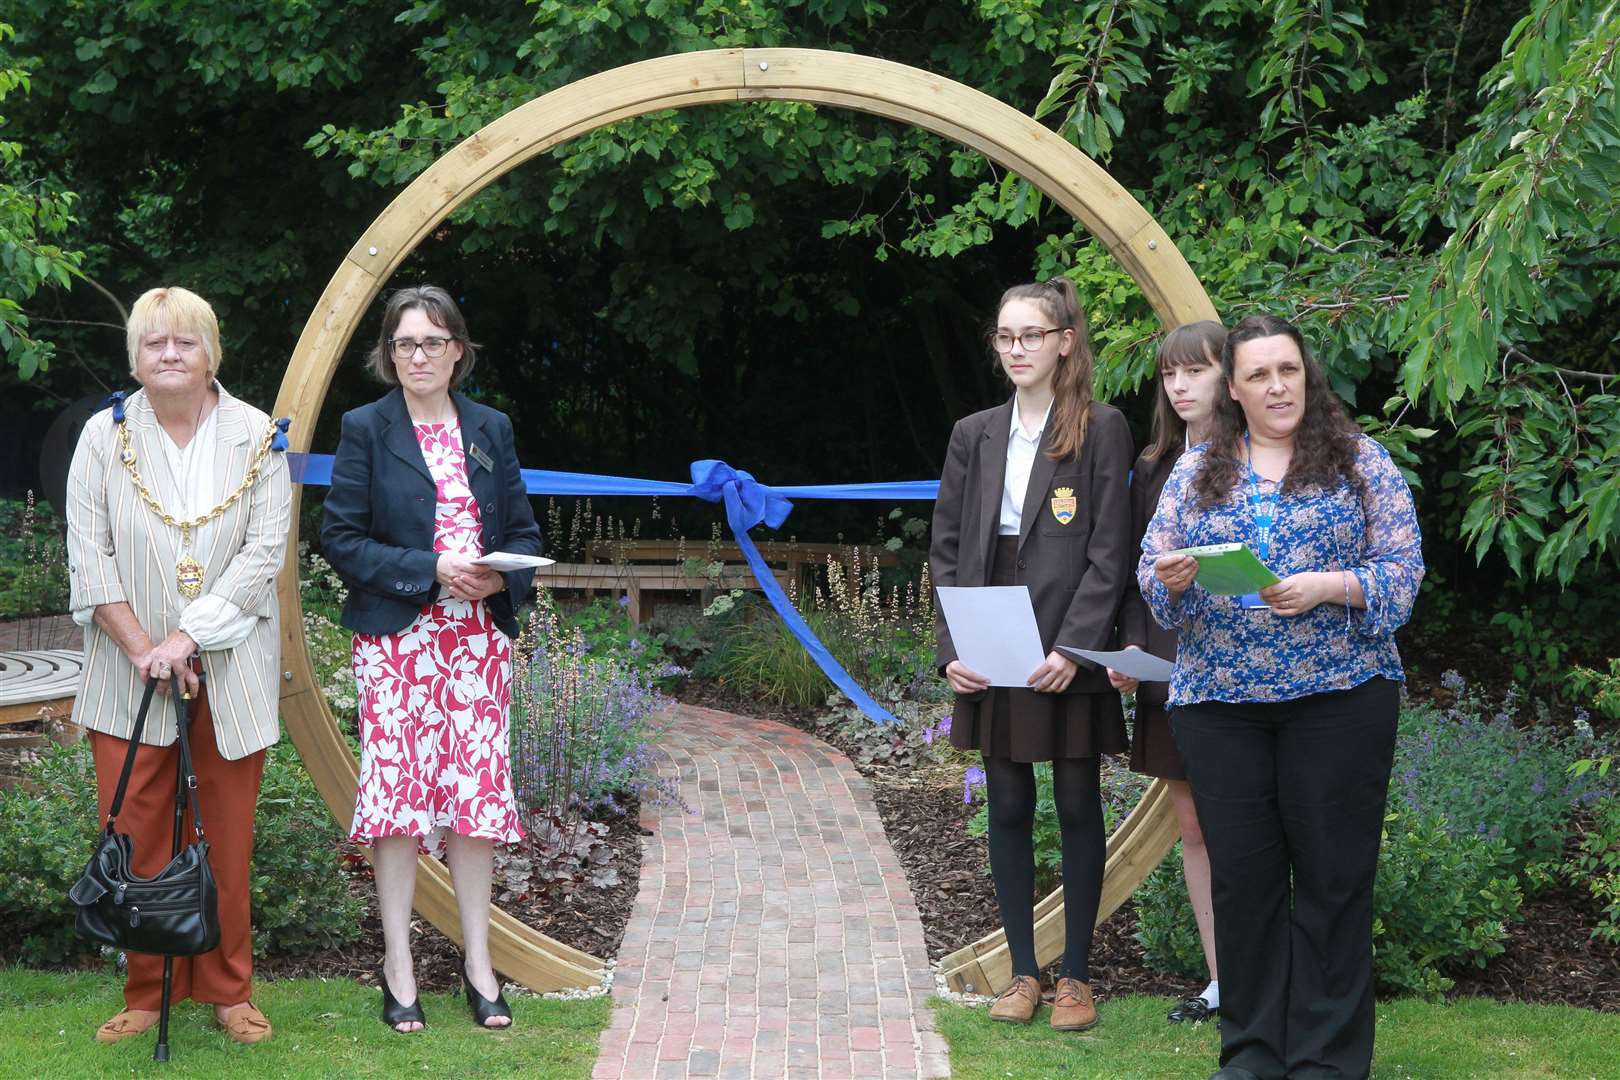 From left, the mayor of Maidstone Cllr Marion Ring, Deborah Stanley, headteacher, Bethya and Charlotte, both 14 and Kerry Green, school counsellor at the grand opening of The Woodland Garden. Picture: John Westhrop (13607545)